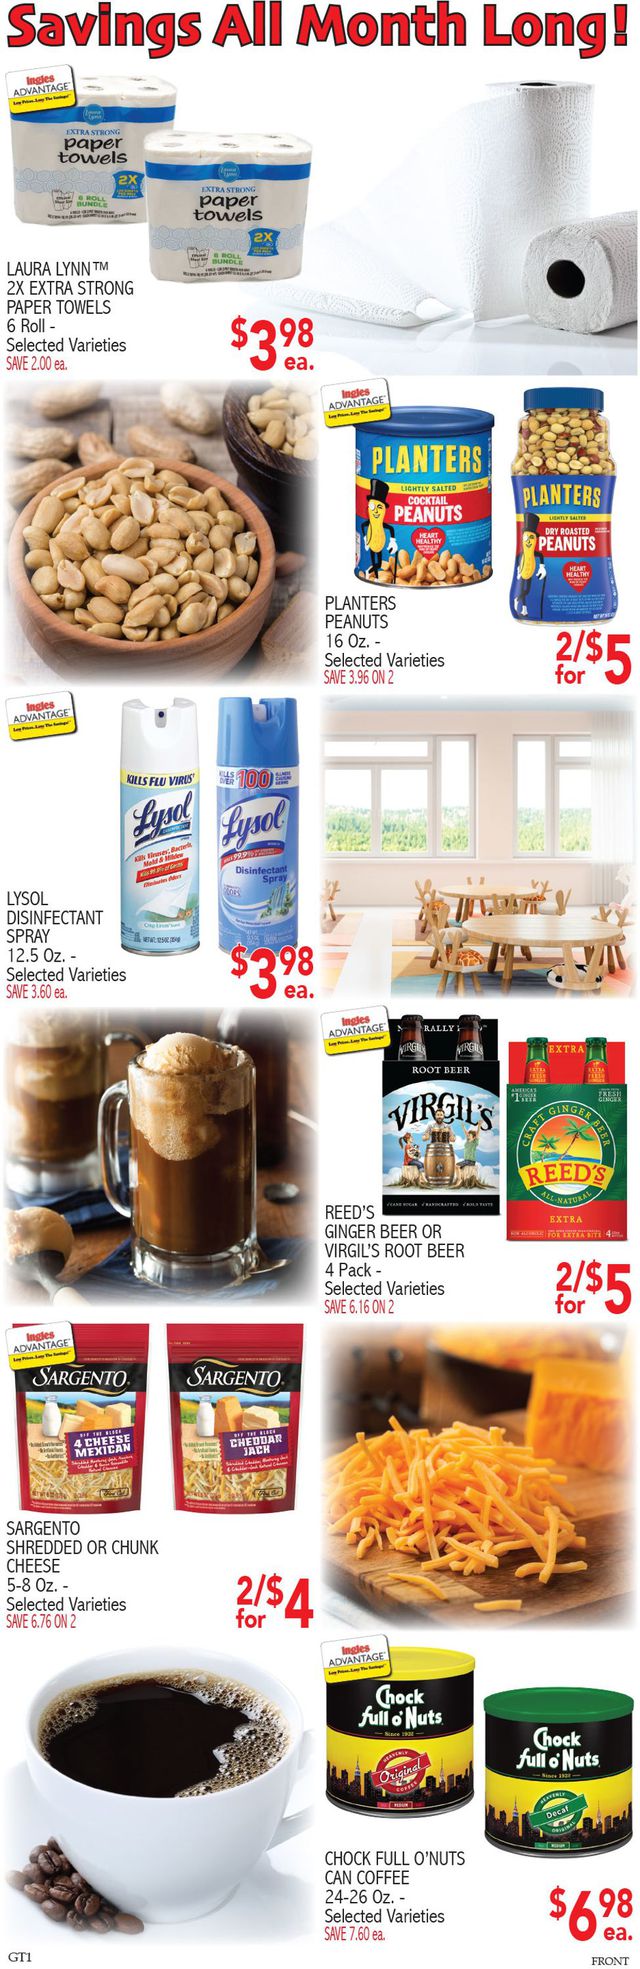 Ingles Ad from 06/08/2022